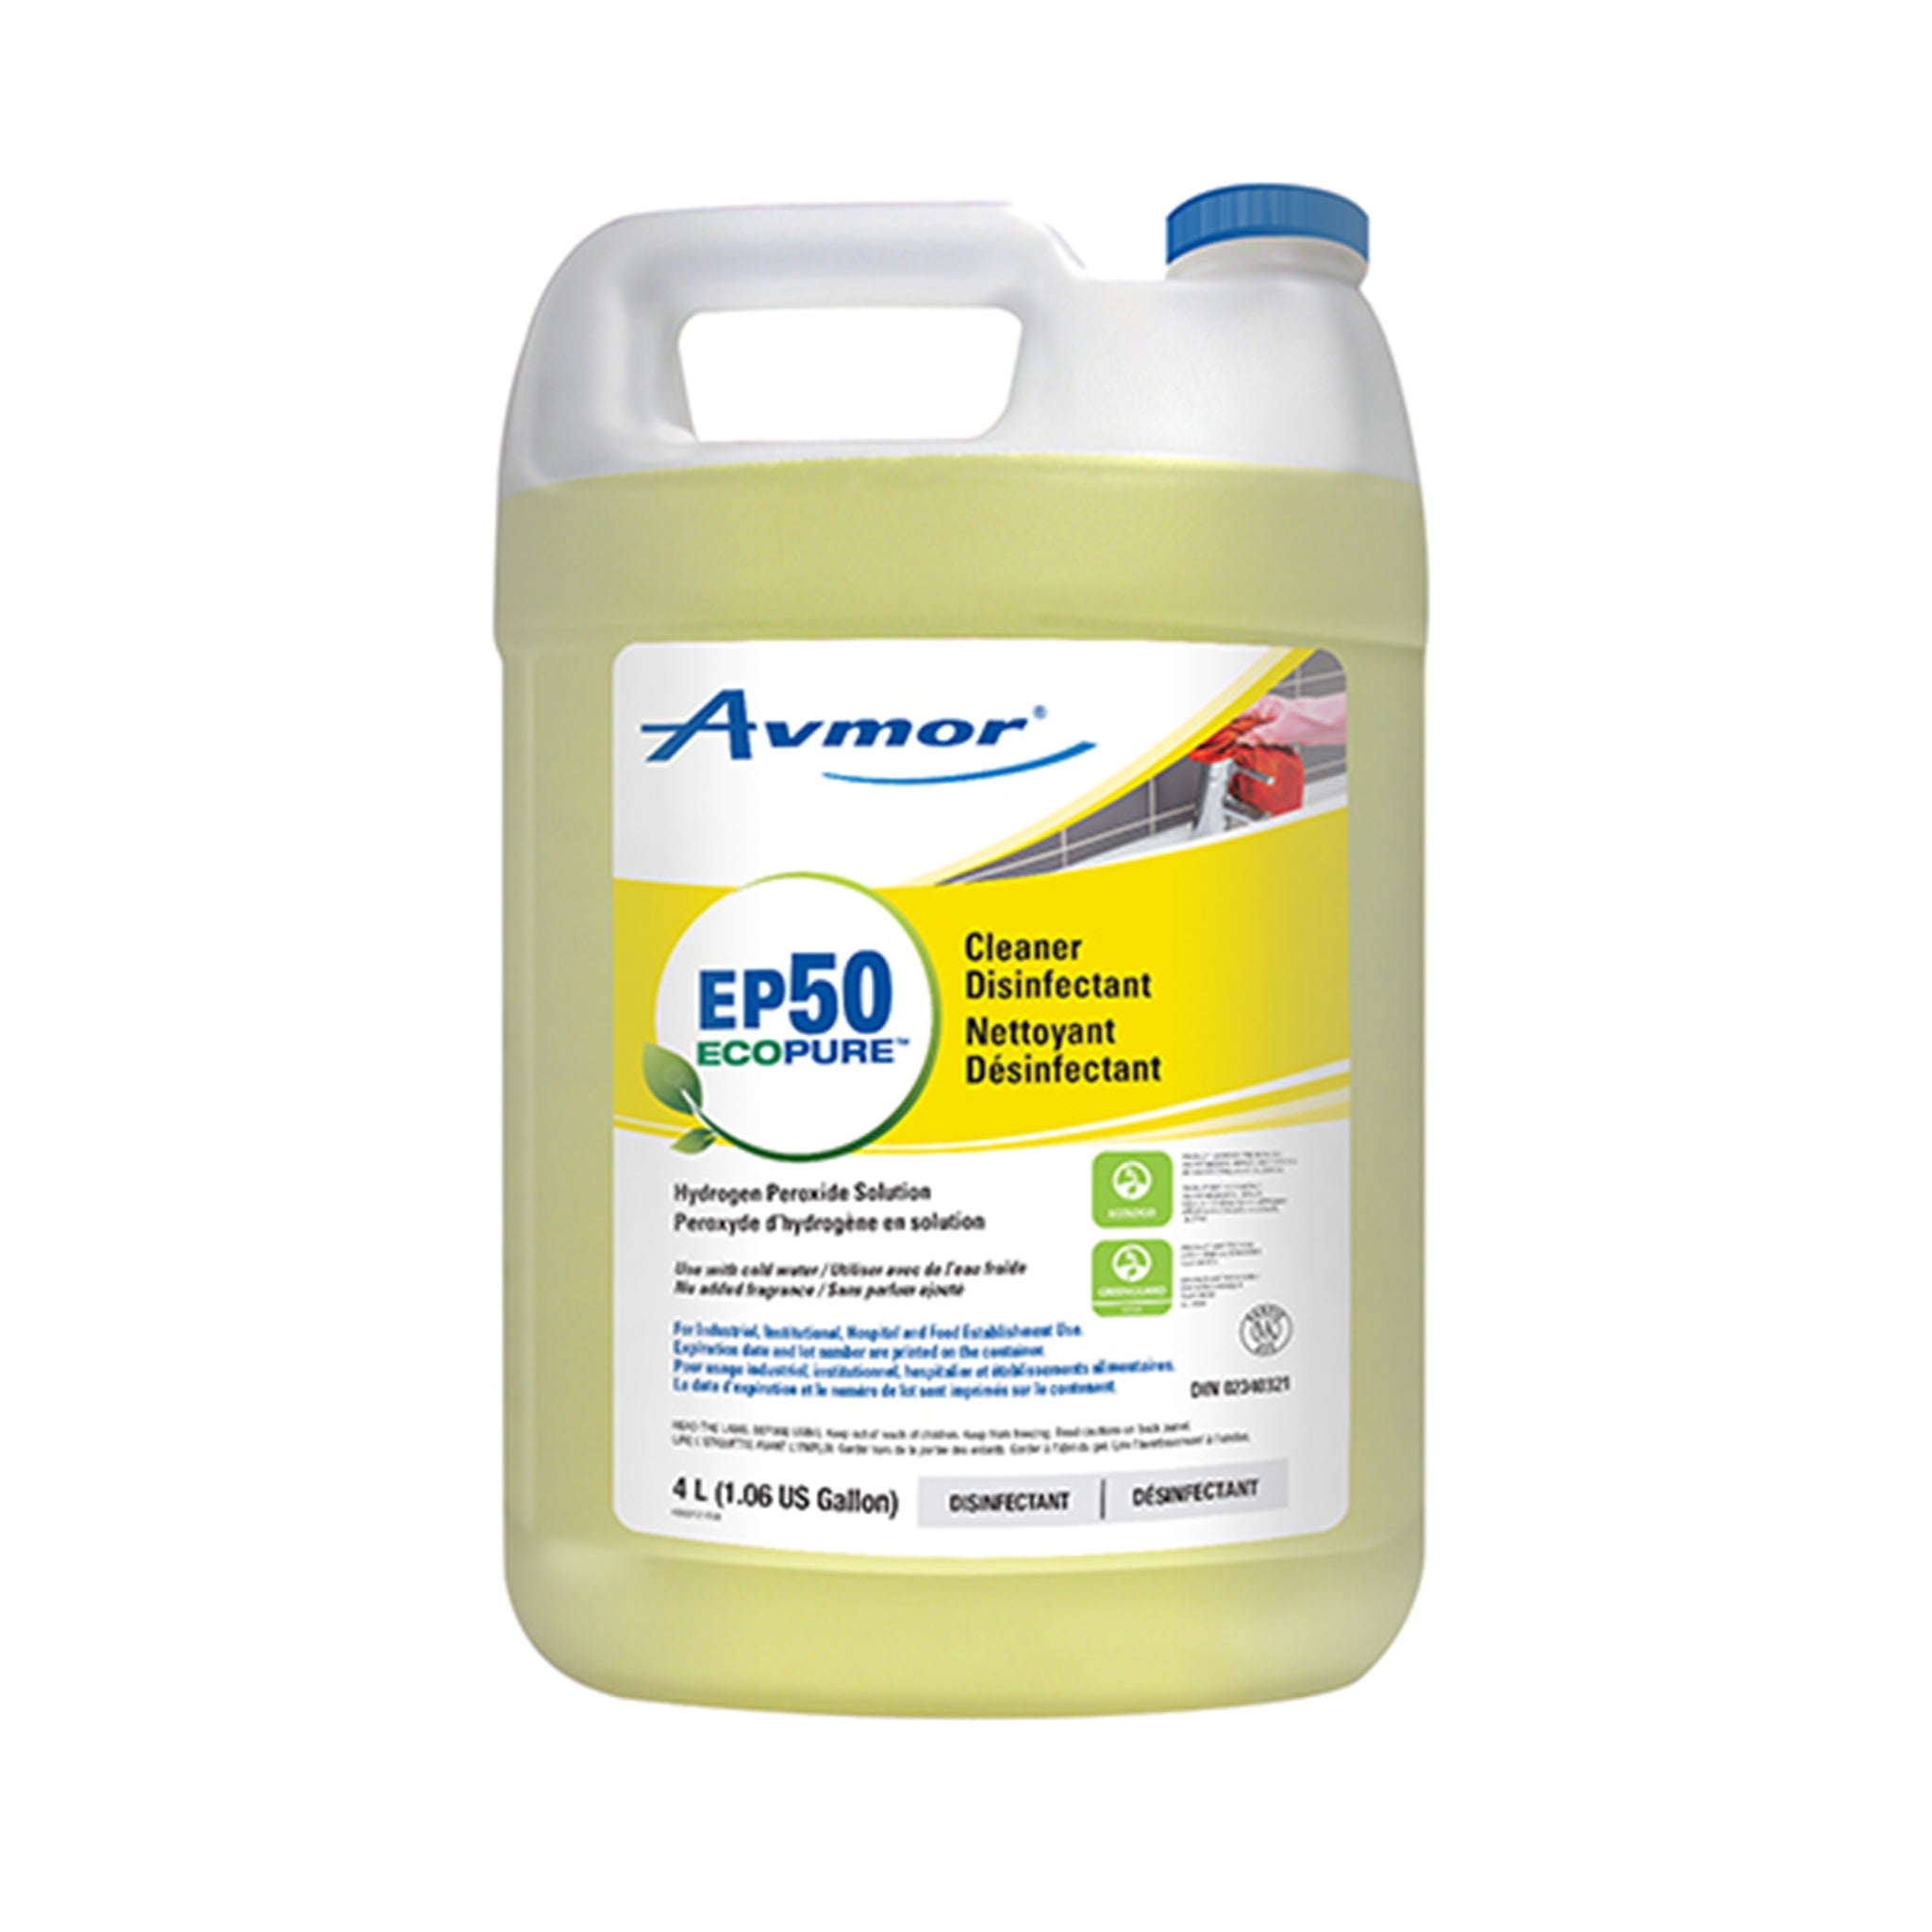 EP50 Cleaner Disinfectant 4L